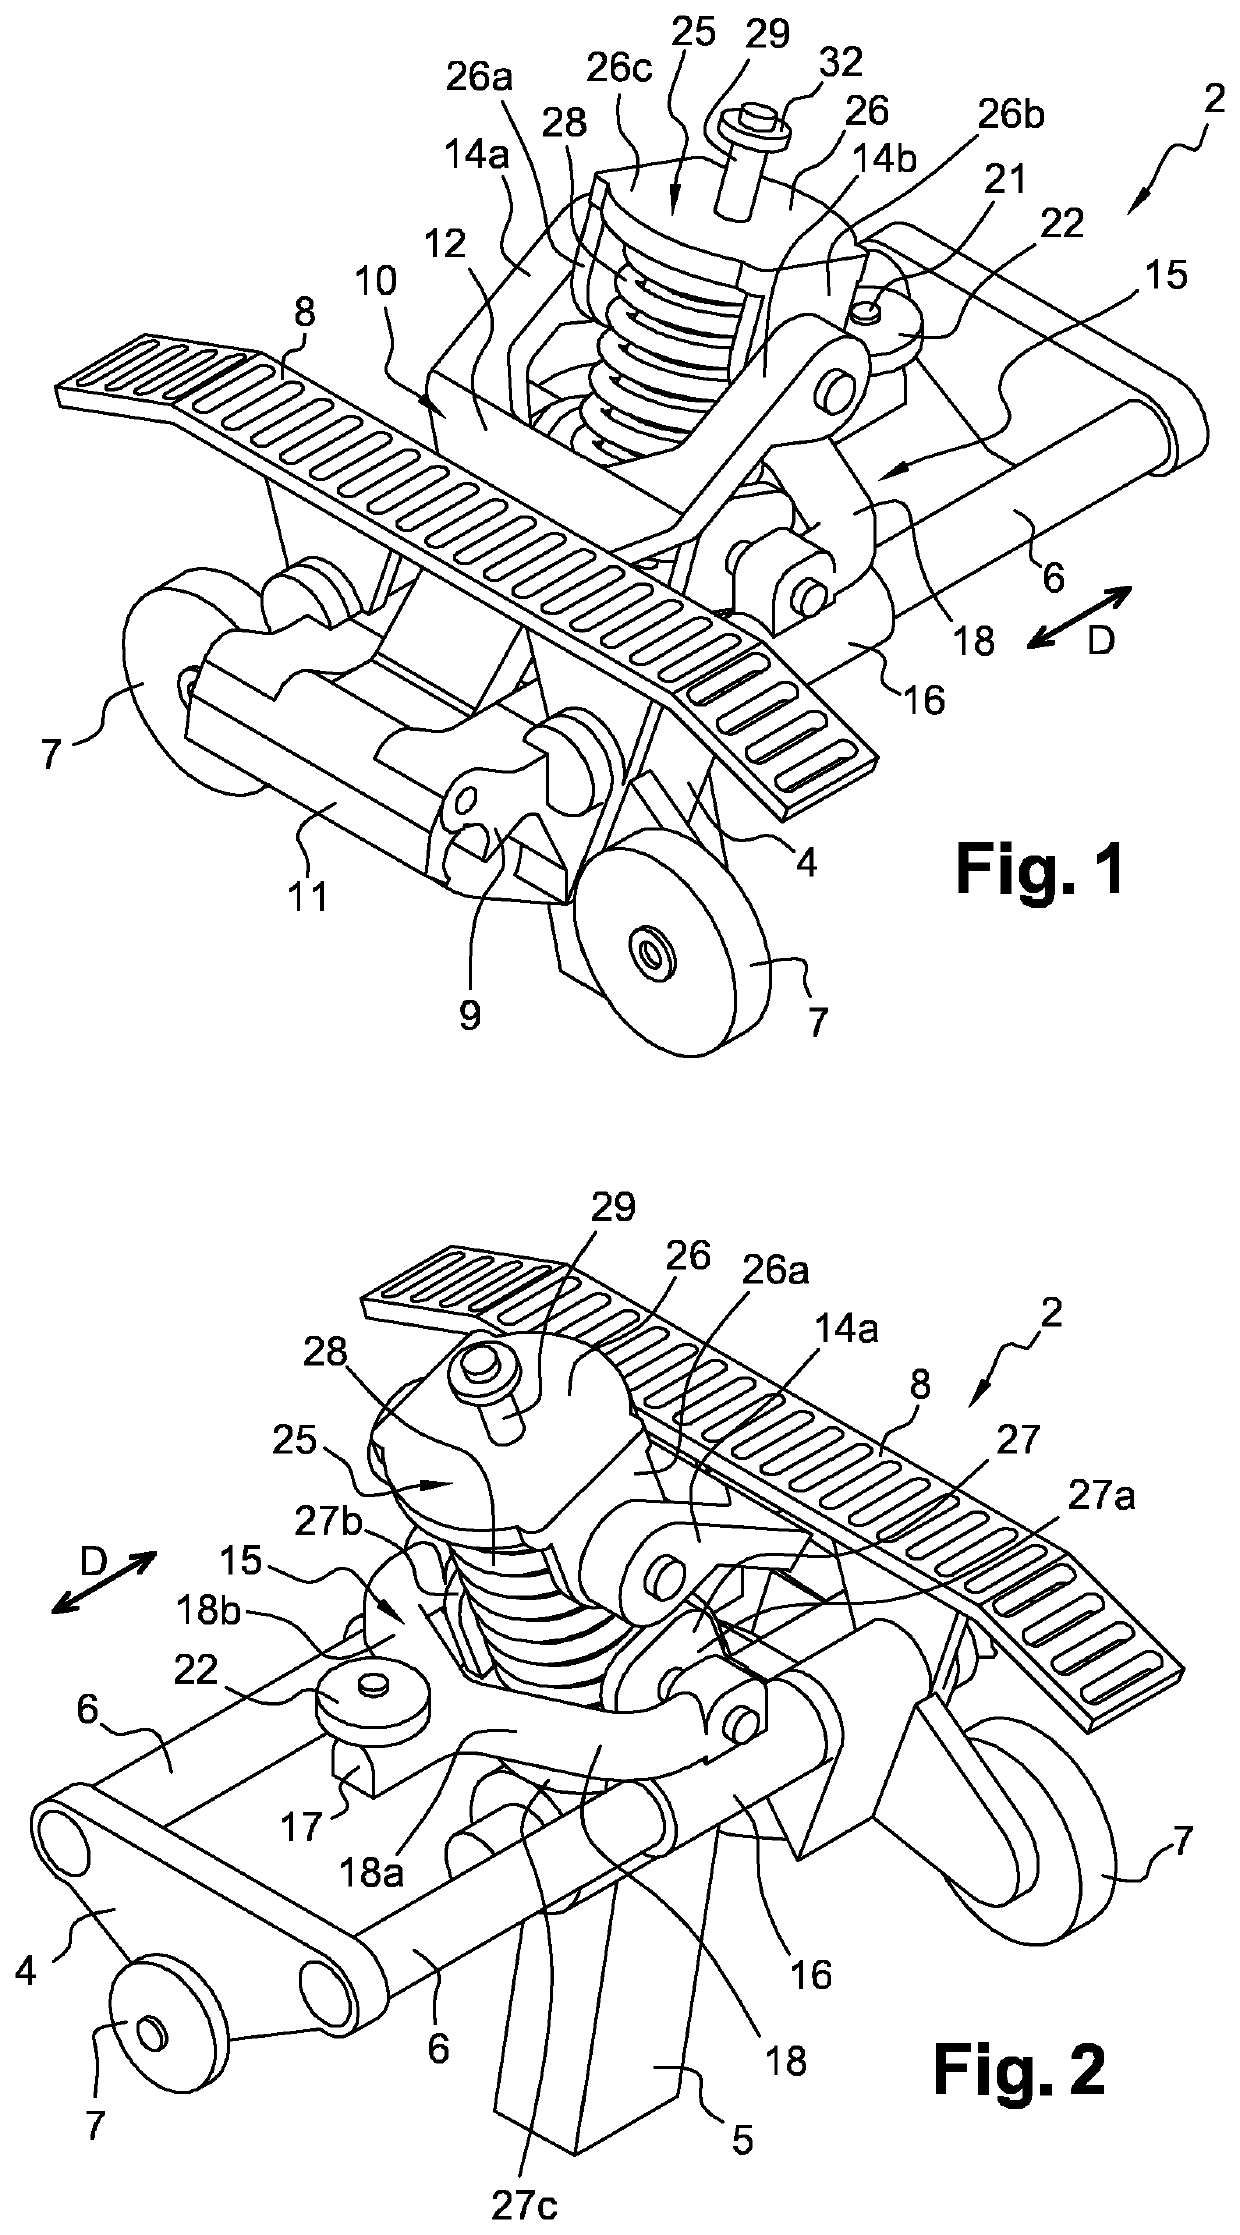 Coupling device intended to couple a vehicle to a traction cable of a transportation installation